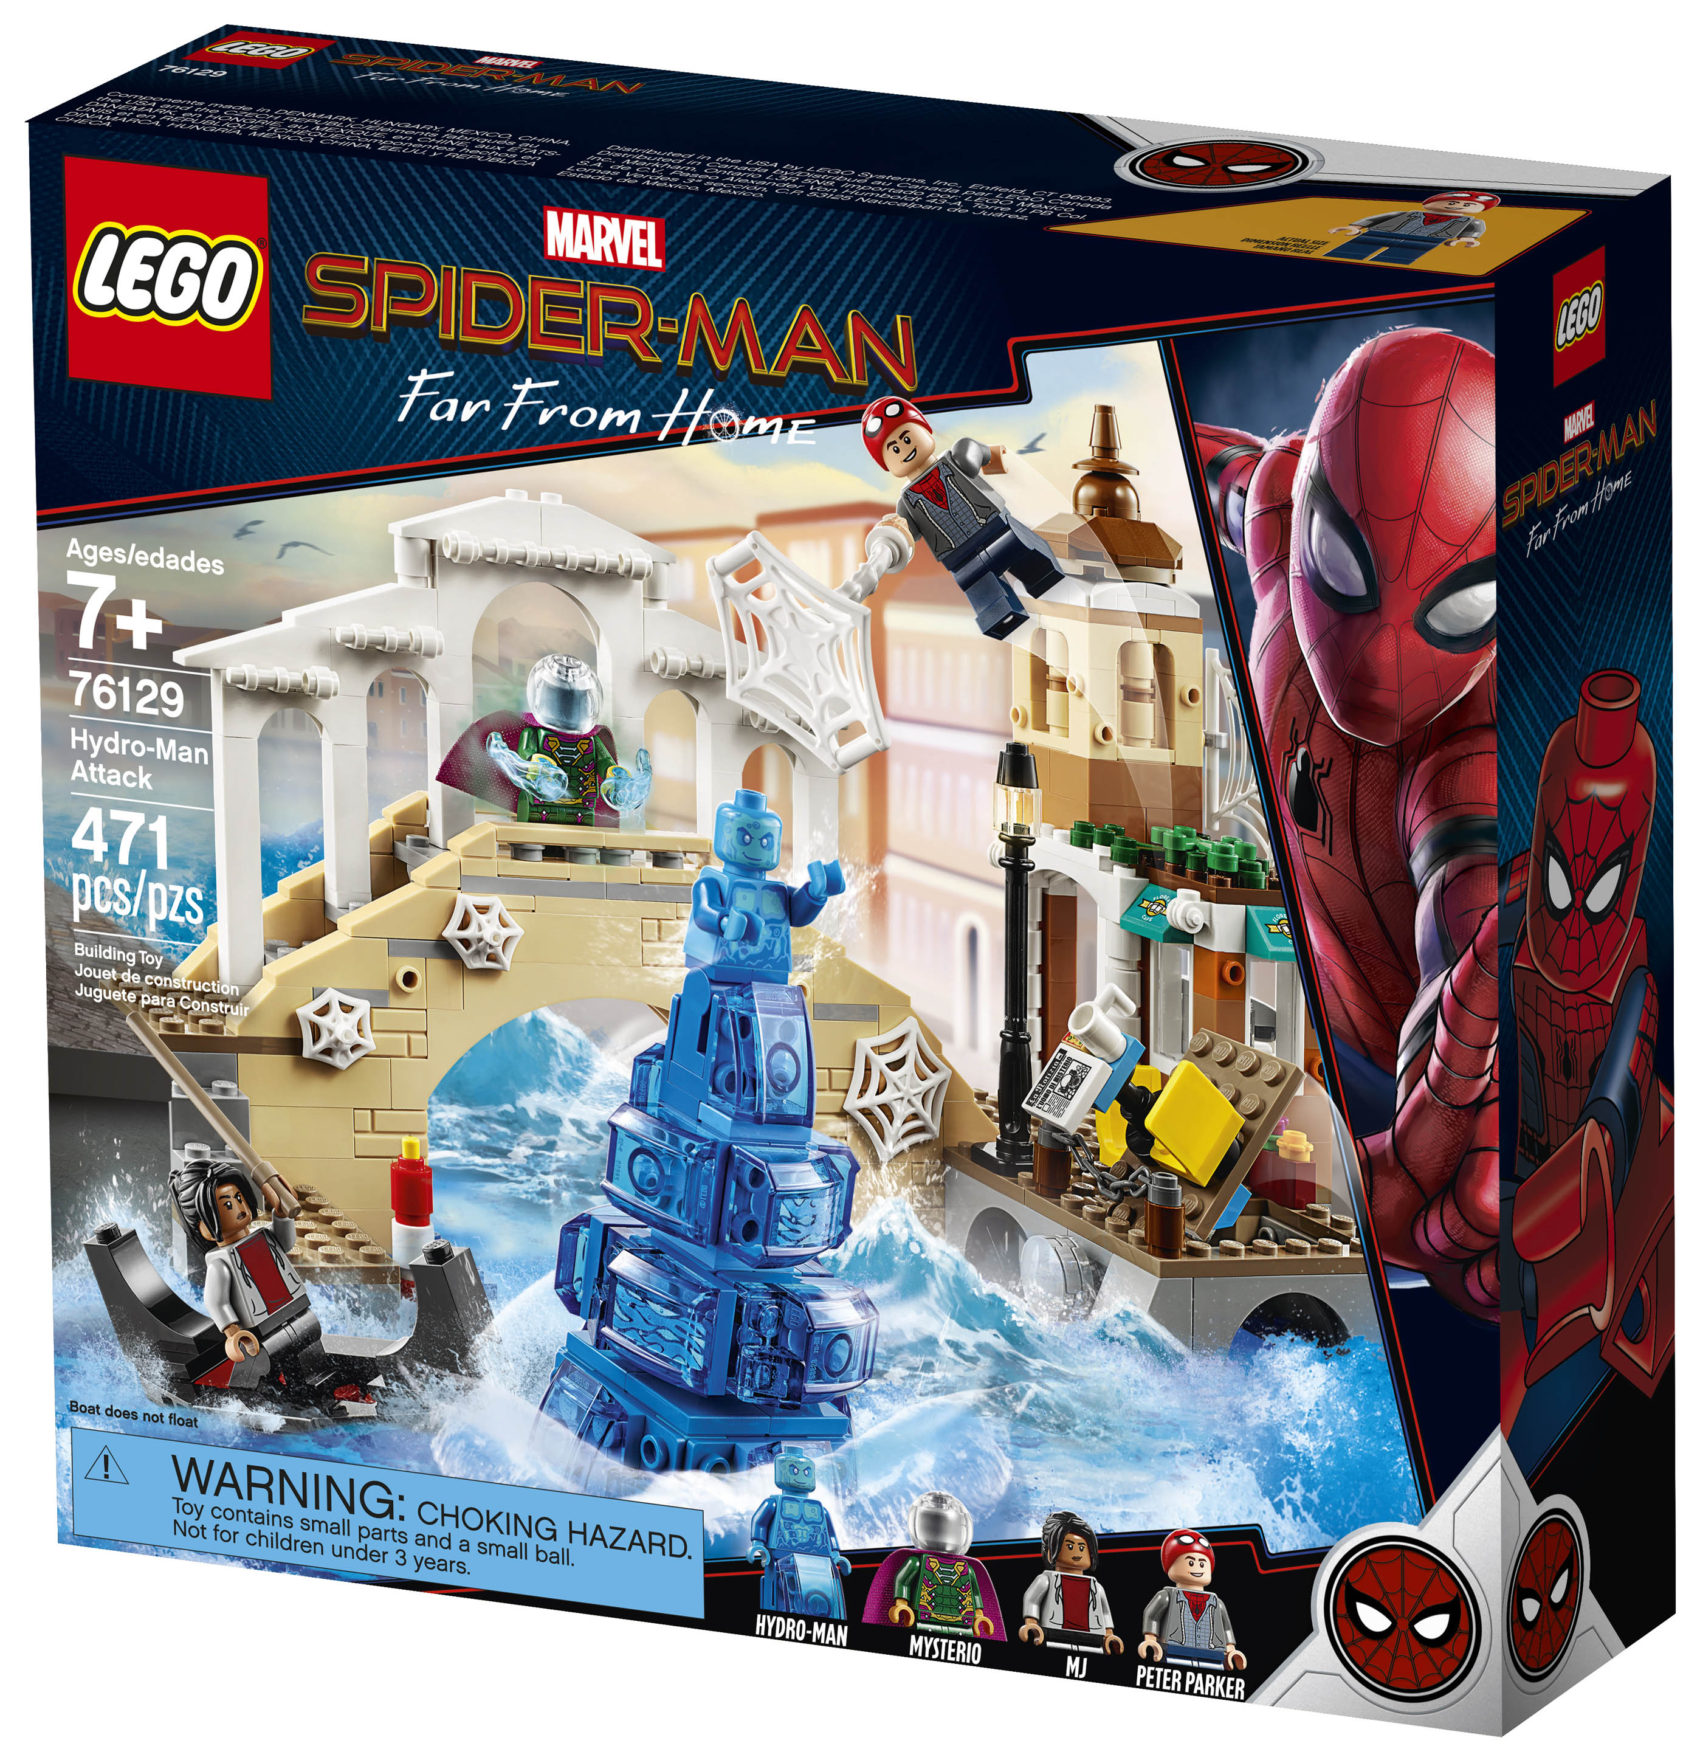 LEGO SpiderMan Far From Home Sets Up for Order! Marvel Toy News